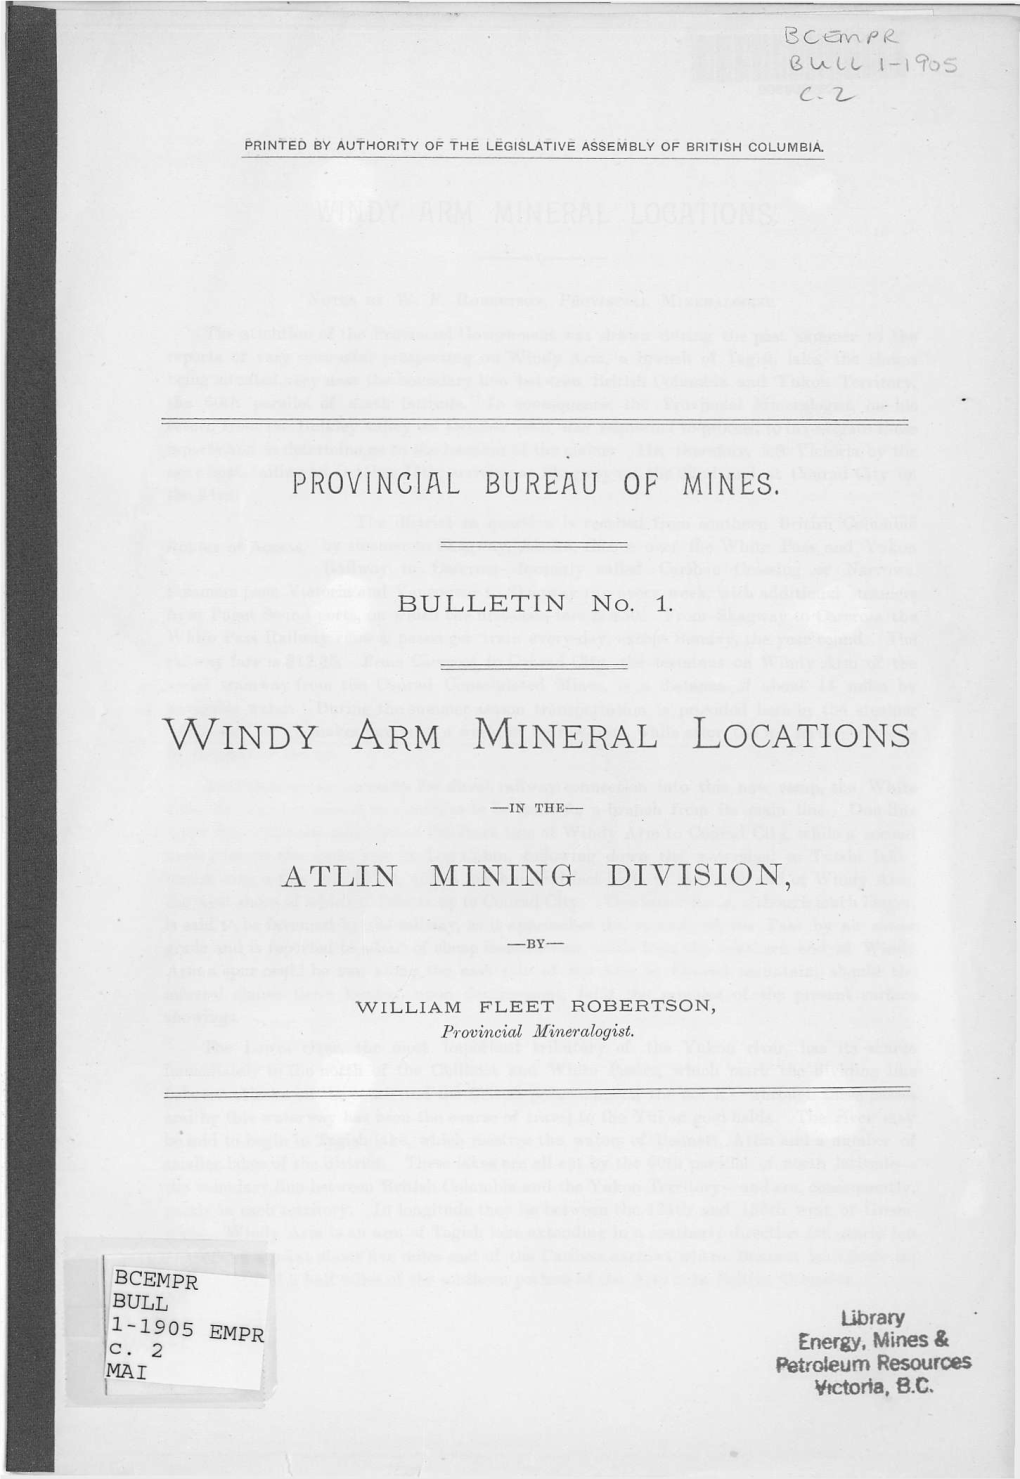 Windy Arm Mineral Locations